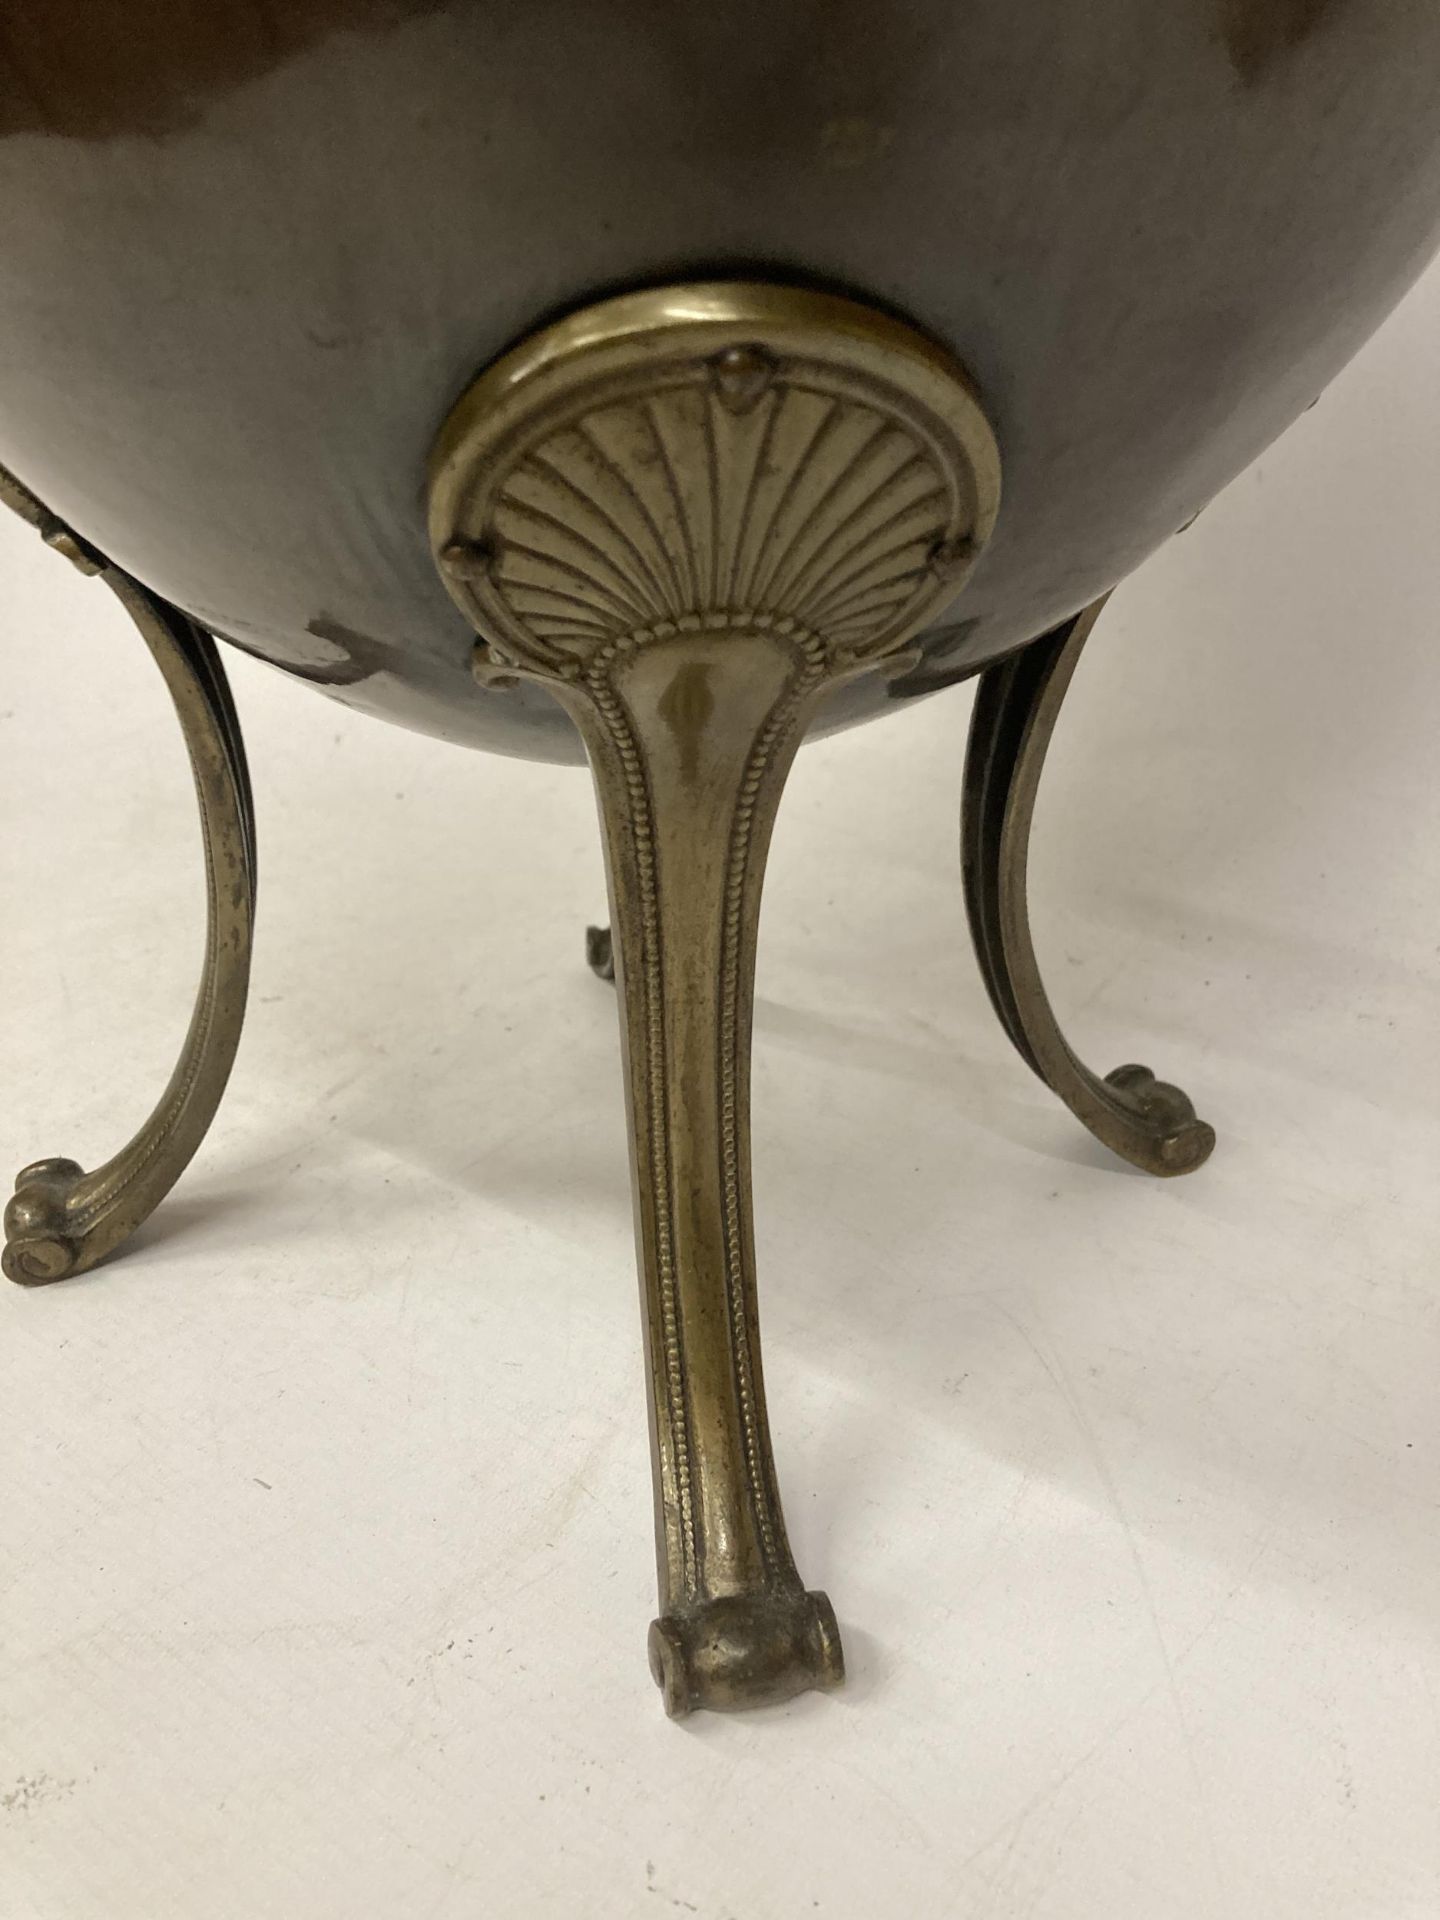 A BRASS AND COPPER COAL BOX ON FOUR LEGS, WITH LION HEAD HANDLES, AN ACORN TOP AND LINER - Image 3 of 5